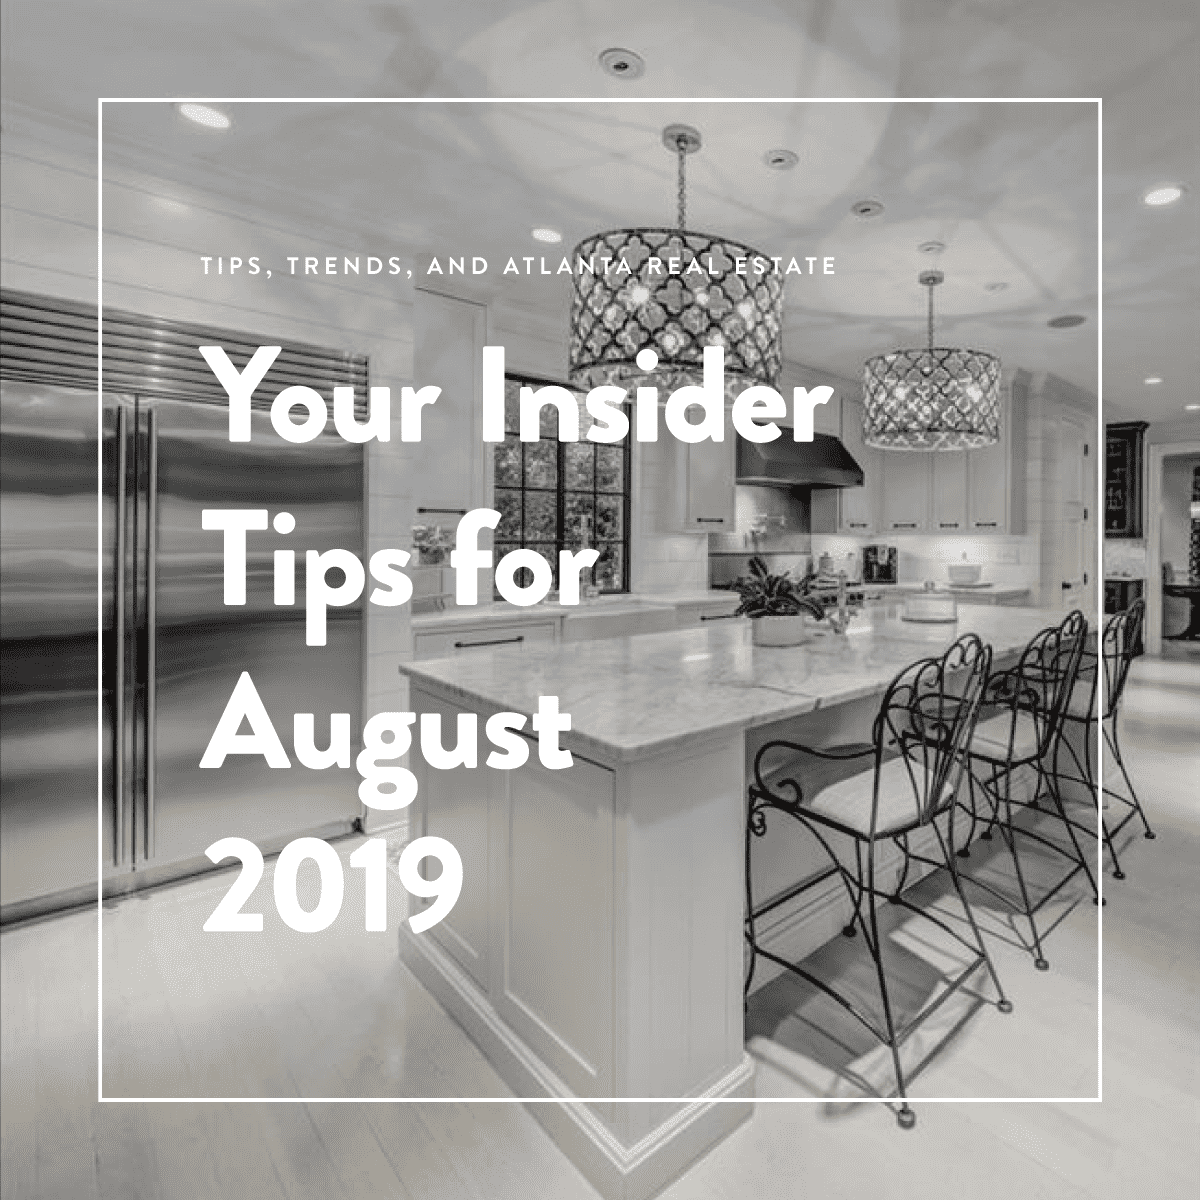 Your Insider Tips for August 2019